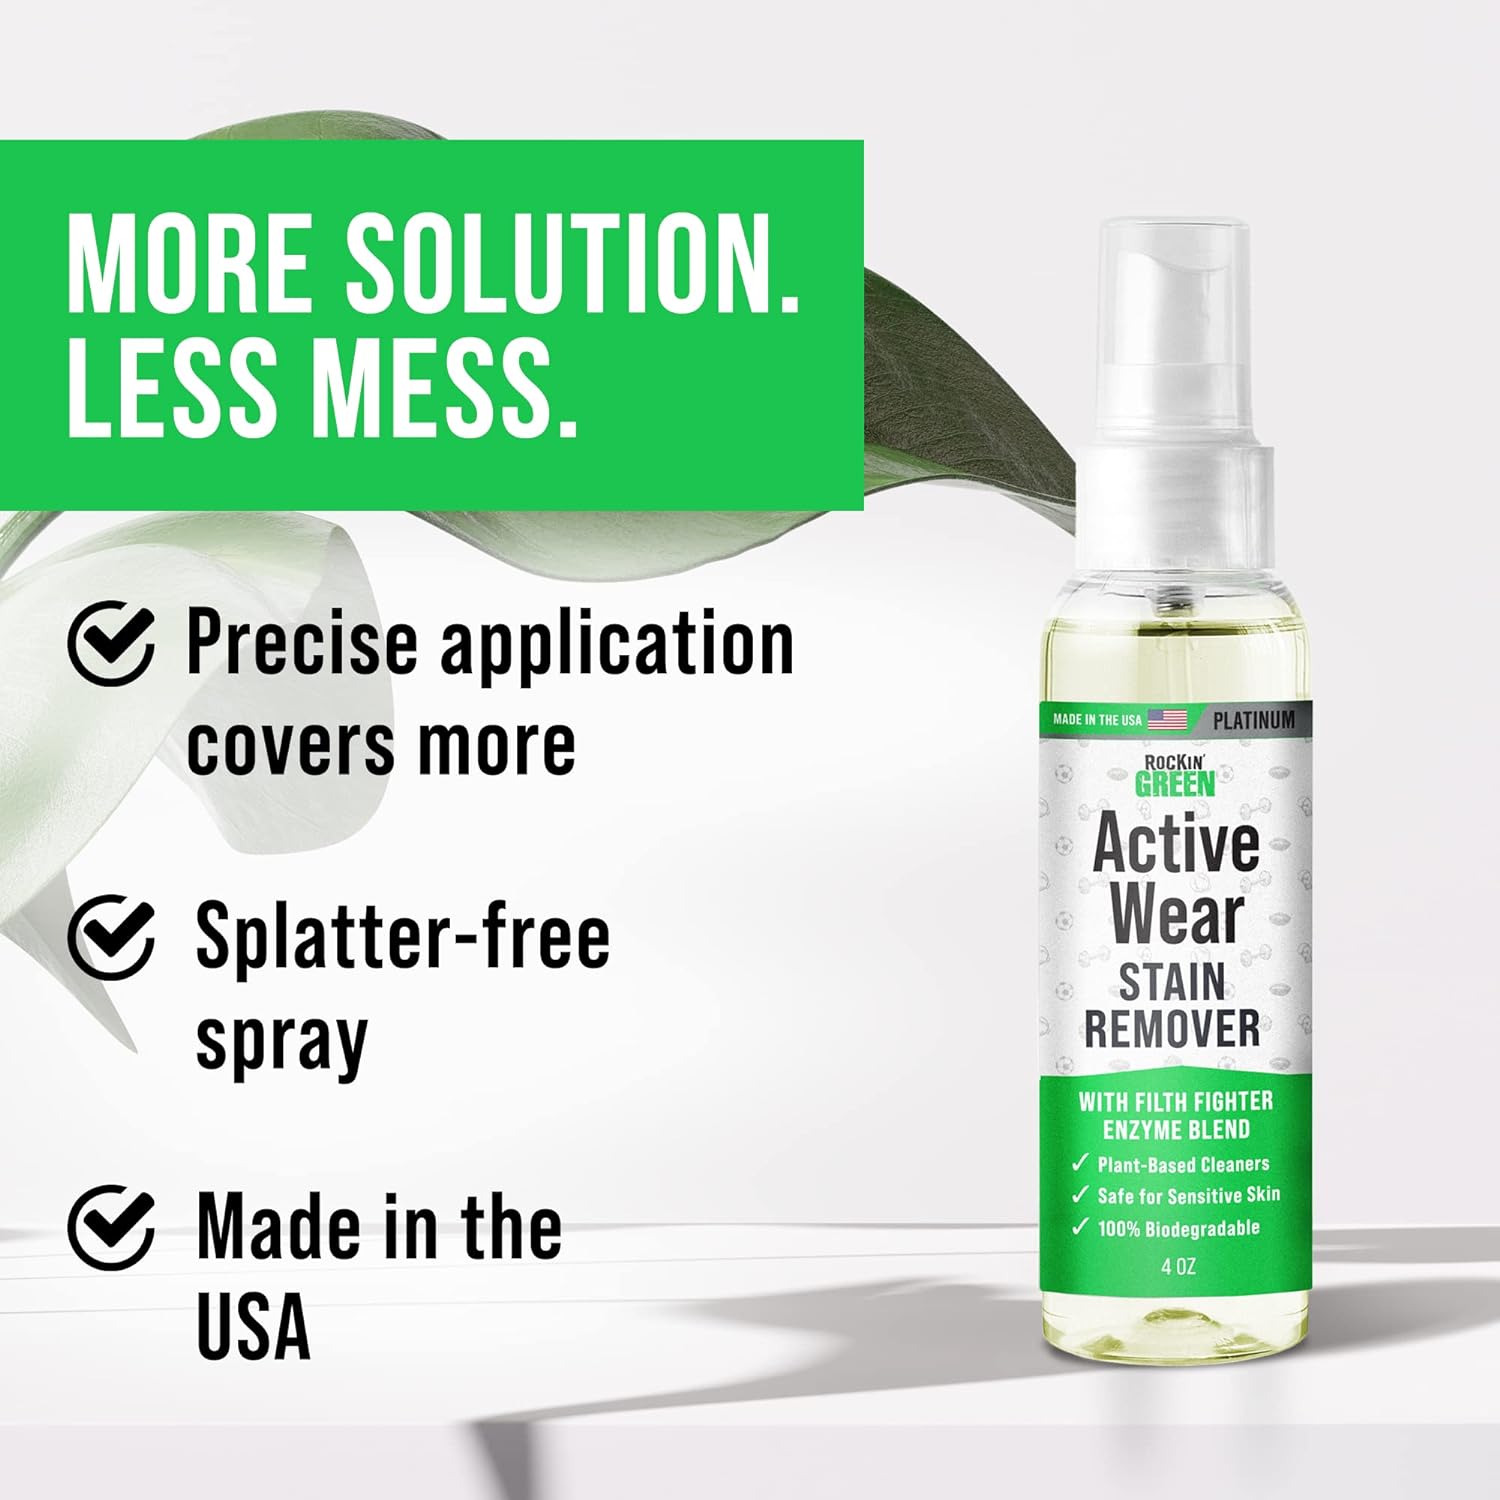 Rockin' Green Activewear Stain Remover for Clothes - Fights Sweat, Dirt, Food Stains, Odor Remover - Stain Remover Spray, Laundry Stain Remover, Spot Remover for Clothes Fabric Stain Remover 4 Fl Oz : Health & Household